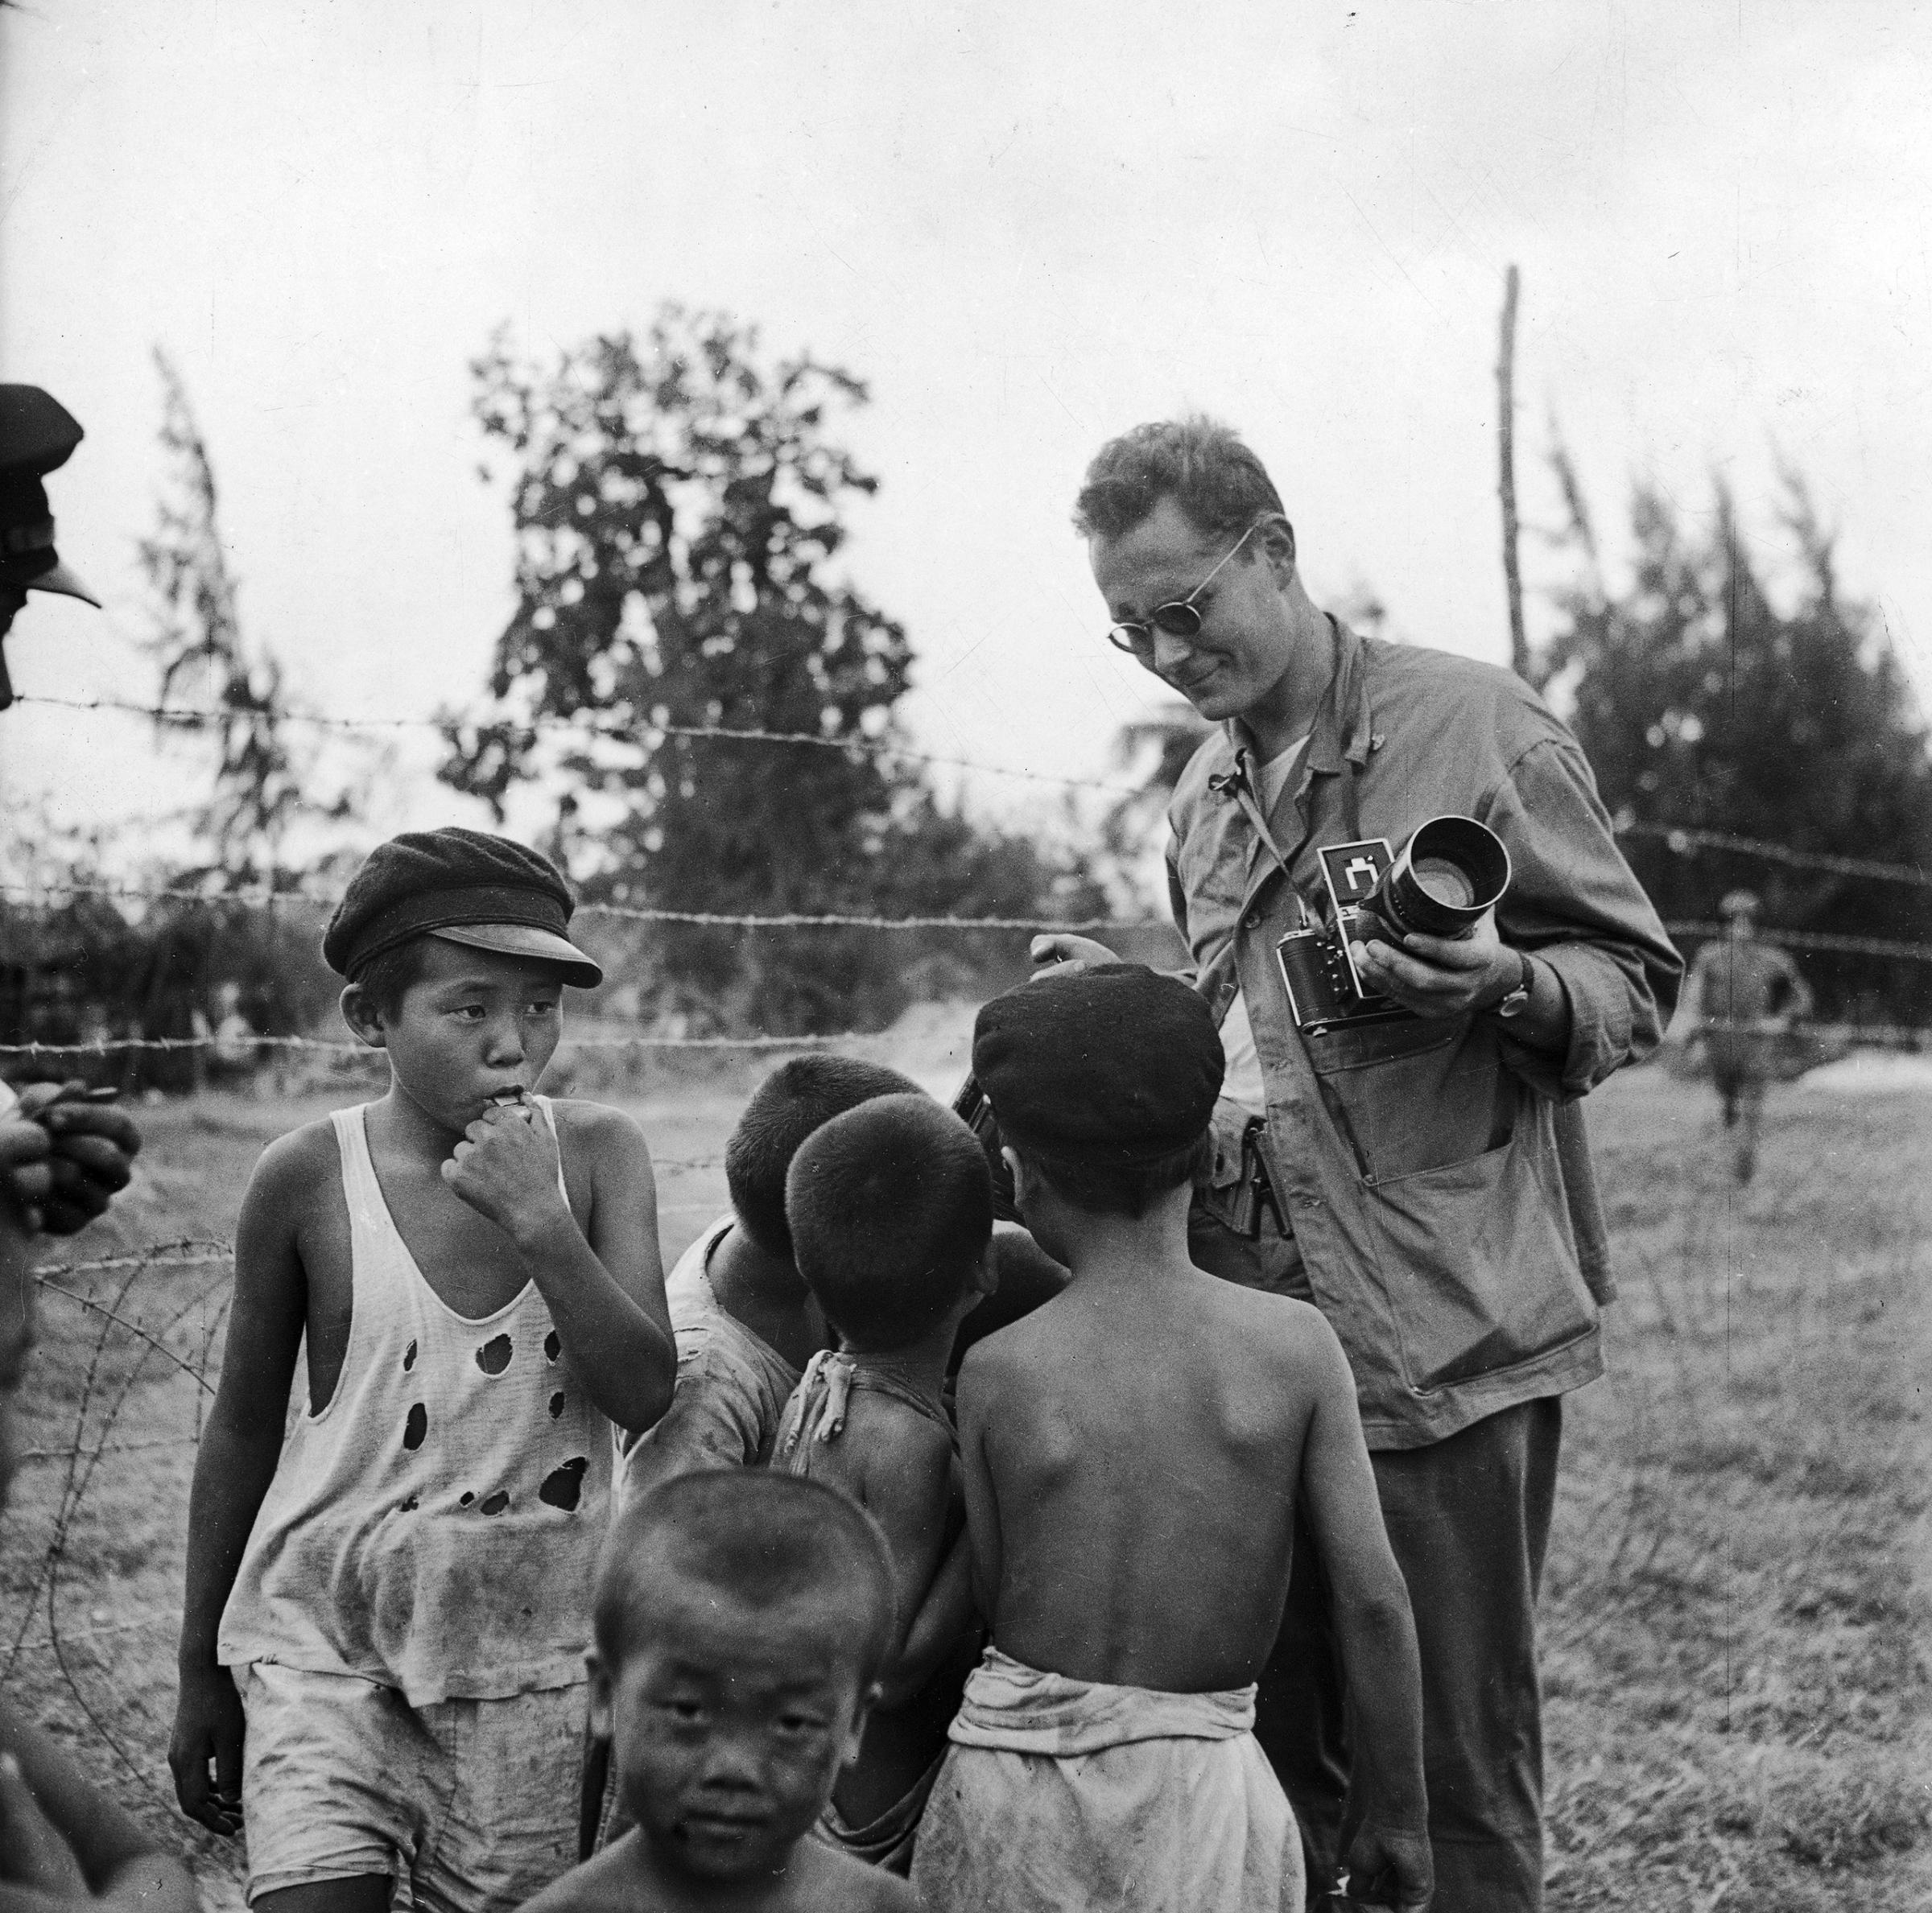 LIFE photographer W. Eugene Smith talking with and giving treats to local children after battle between Japanese and American forces for control of Saipan.